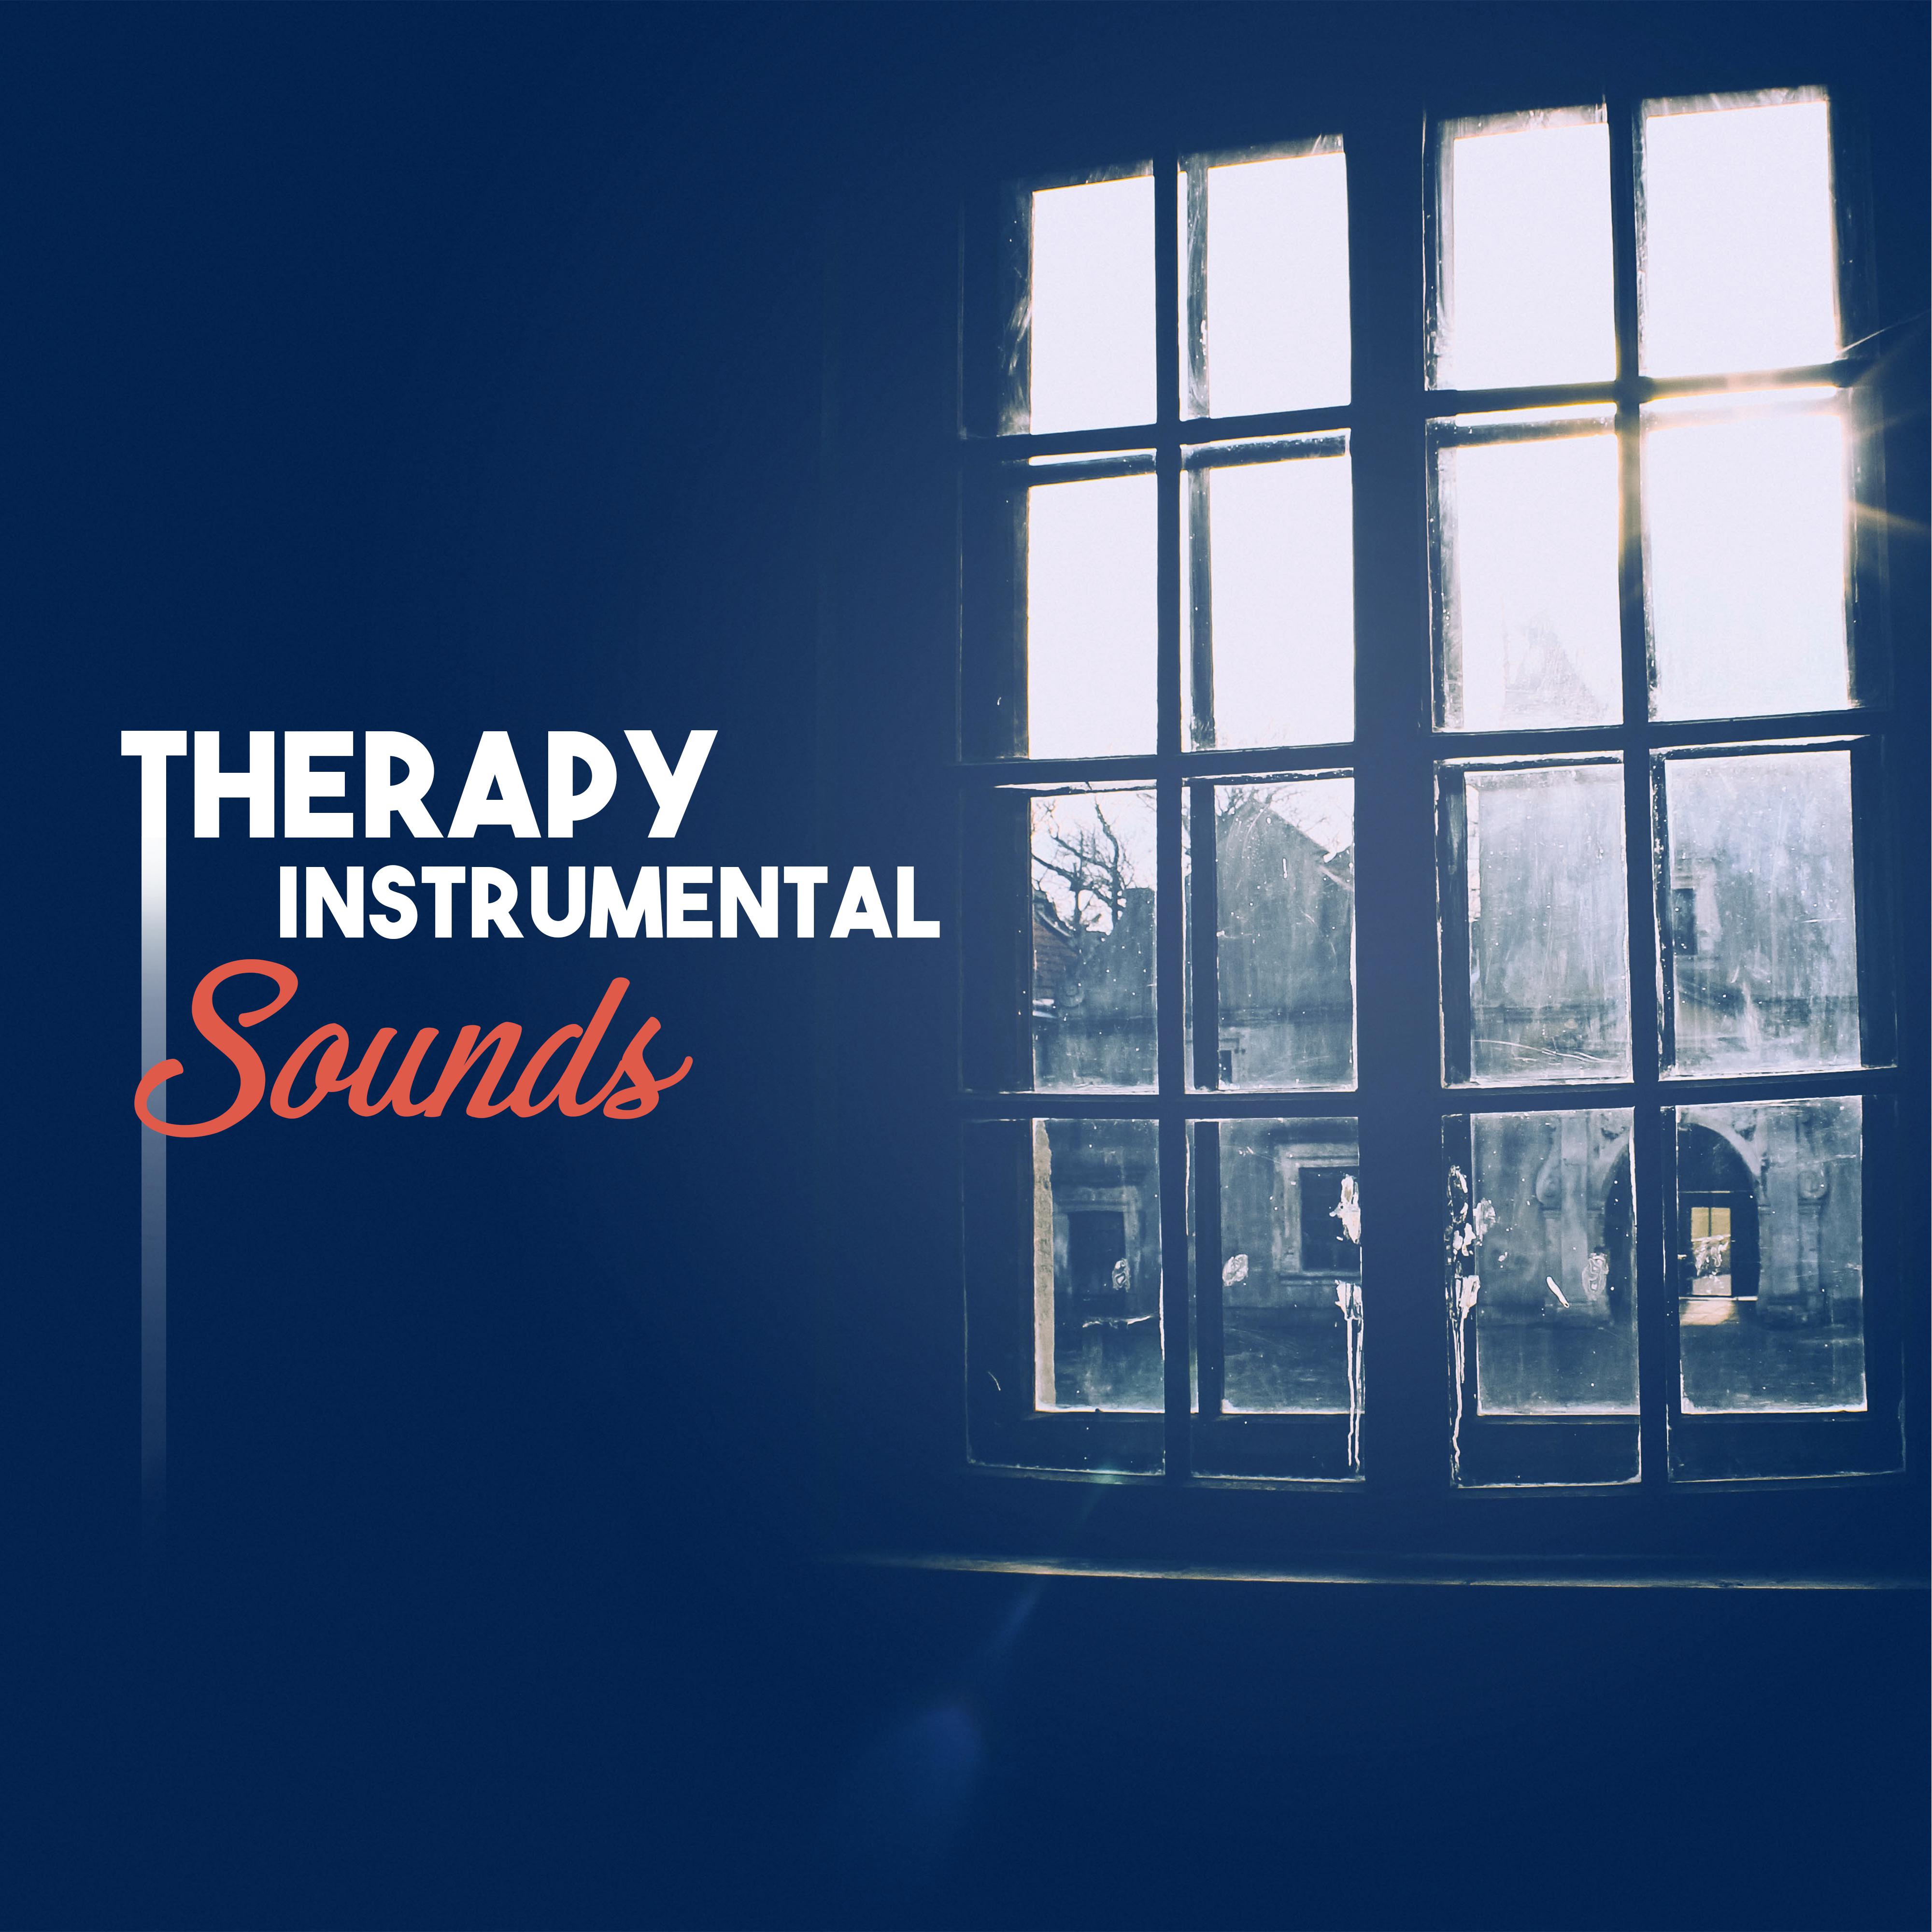 Therapy Instrumental Sounds – Smooth Jazz for Relaxation, Calming Music, Best Chillout, Jazz Music Ambient, Soothing Piano, Guitar